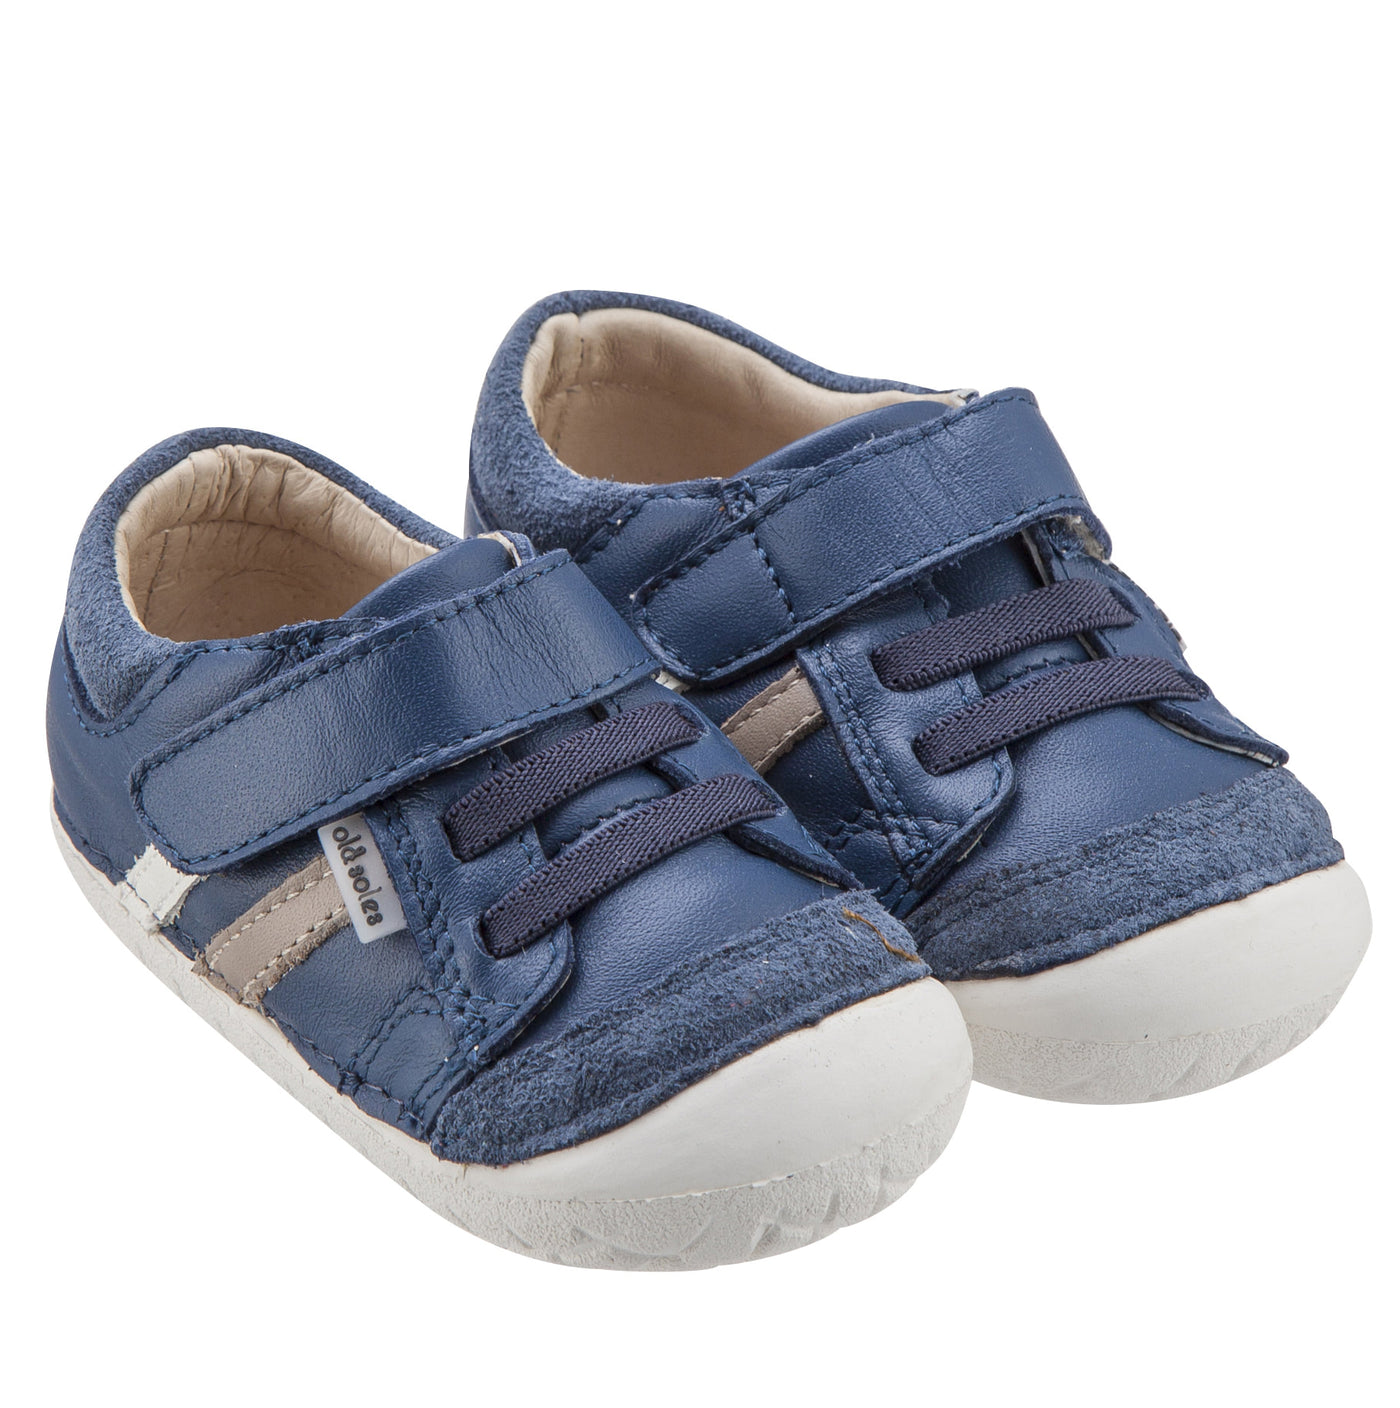 Old Soles Baby 4000 Pave Denzle Sneakers Shoes in Jeans/Taupe